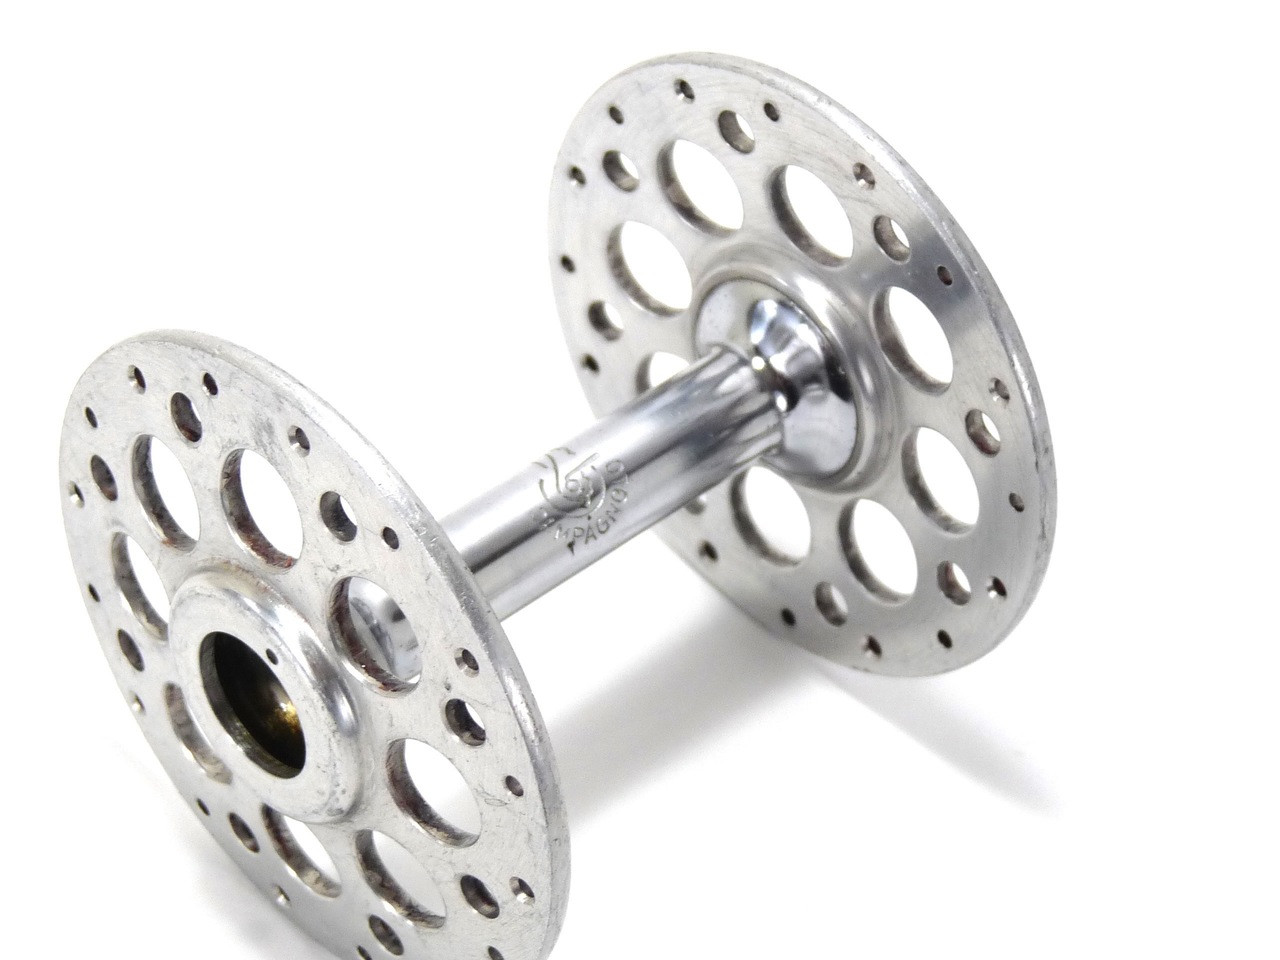  Campagnolo Gran Sport high flange Front hub shell